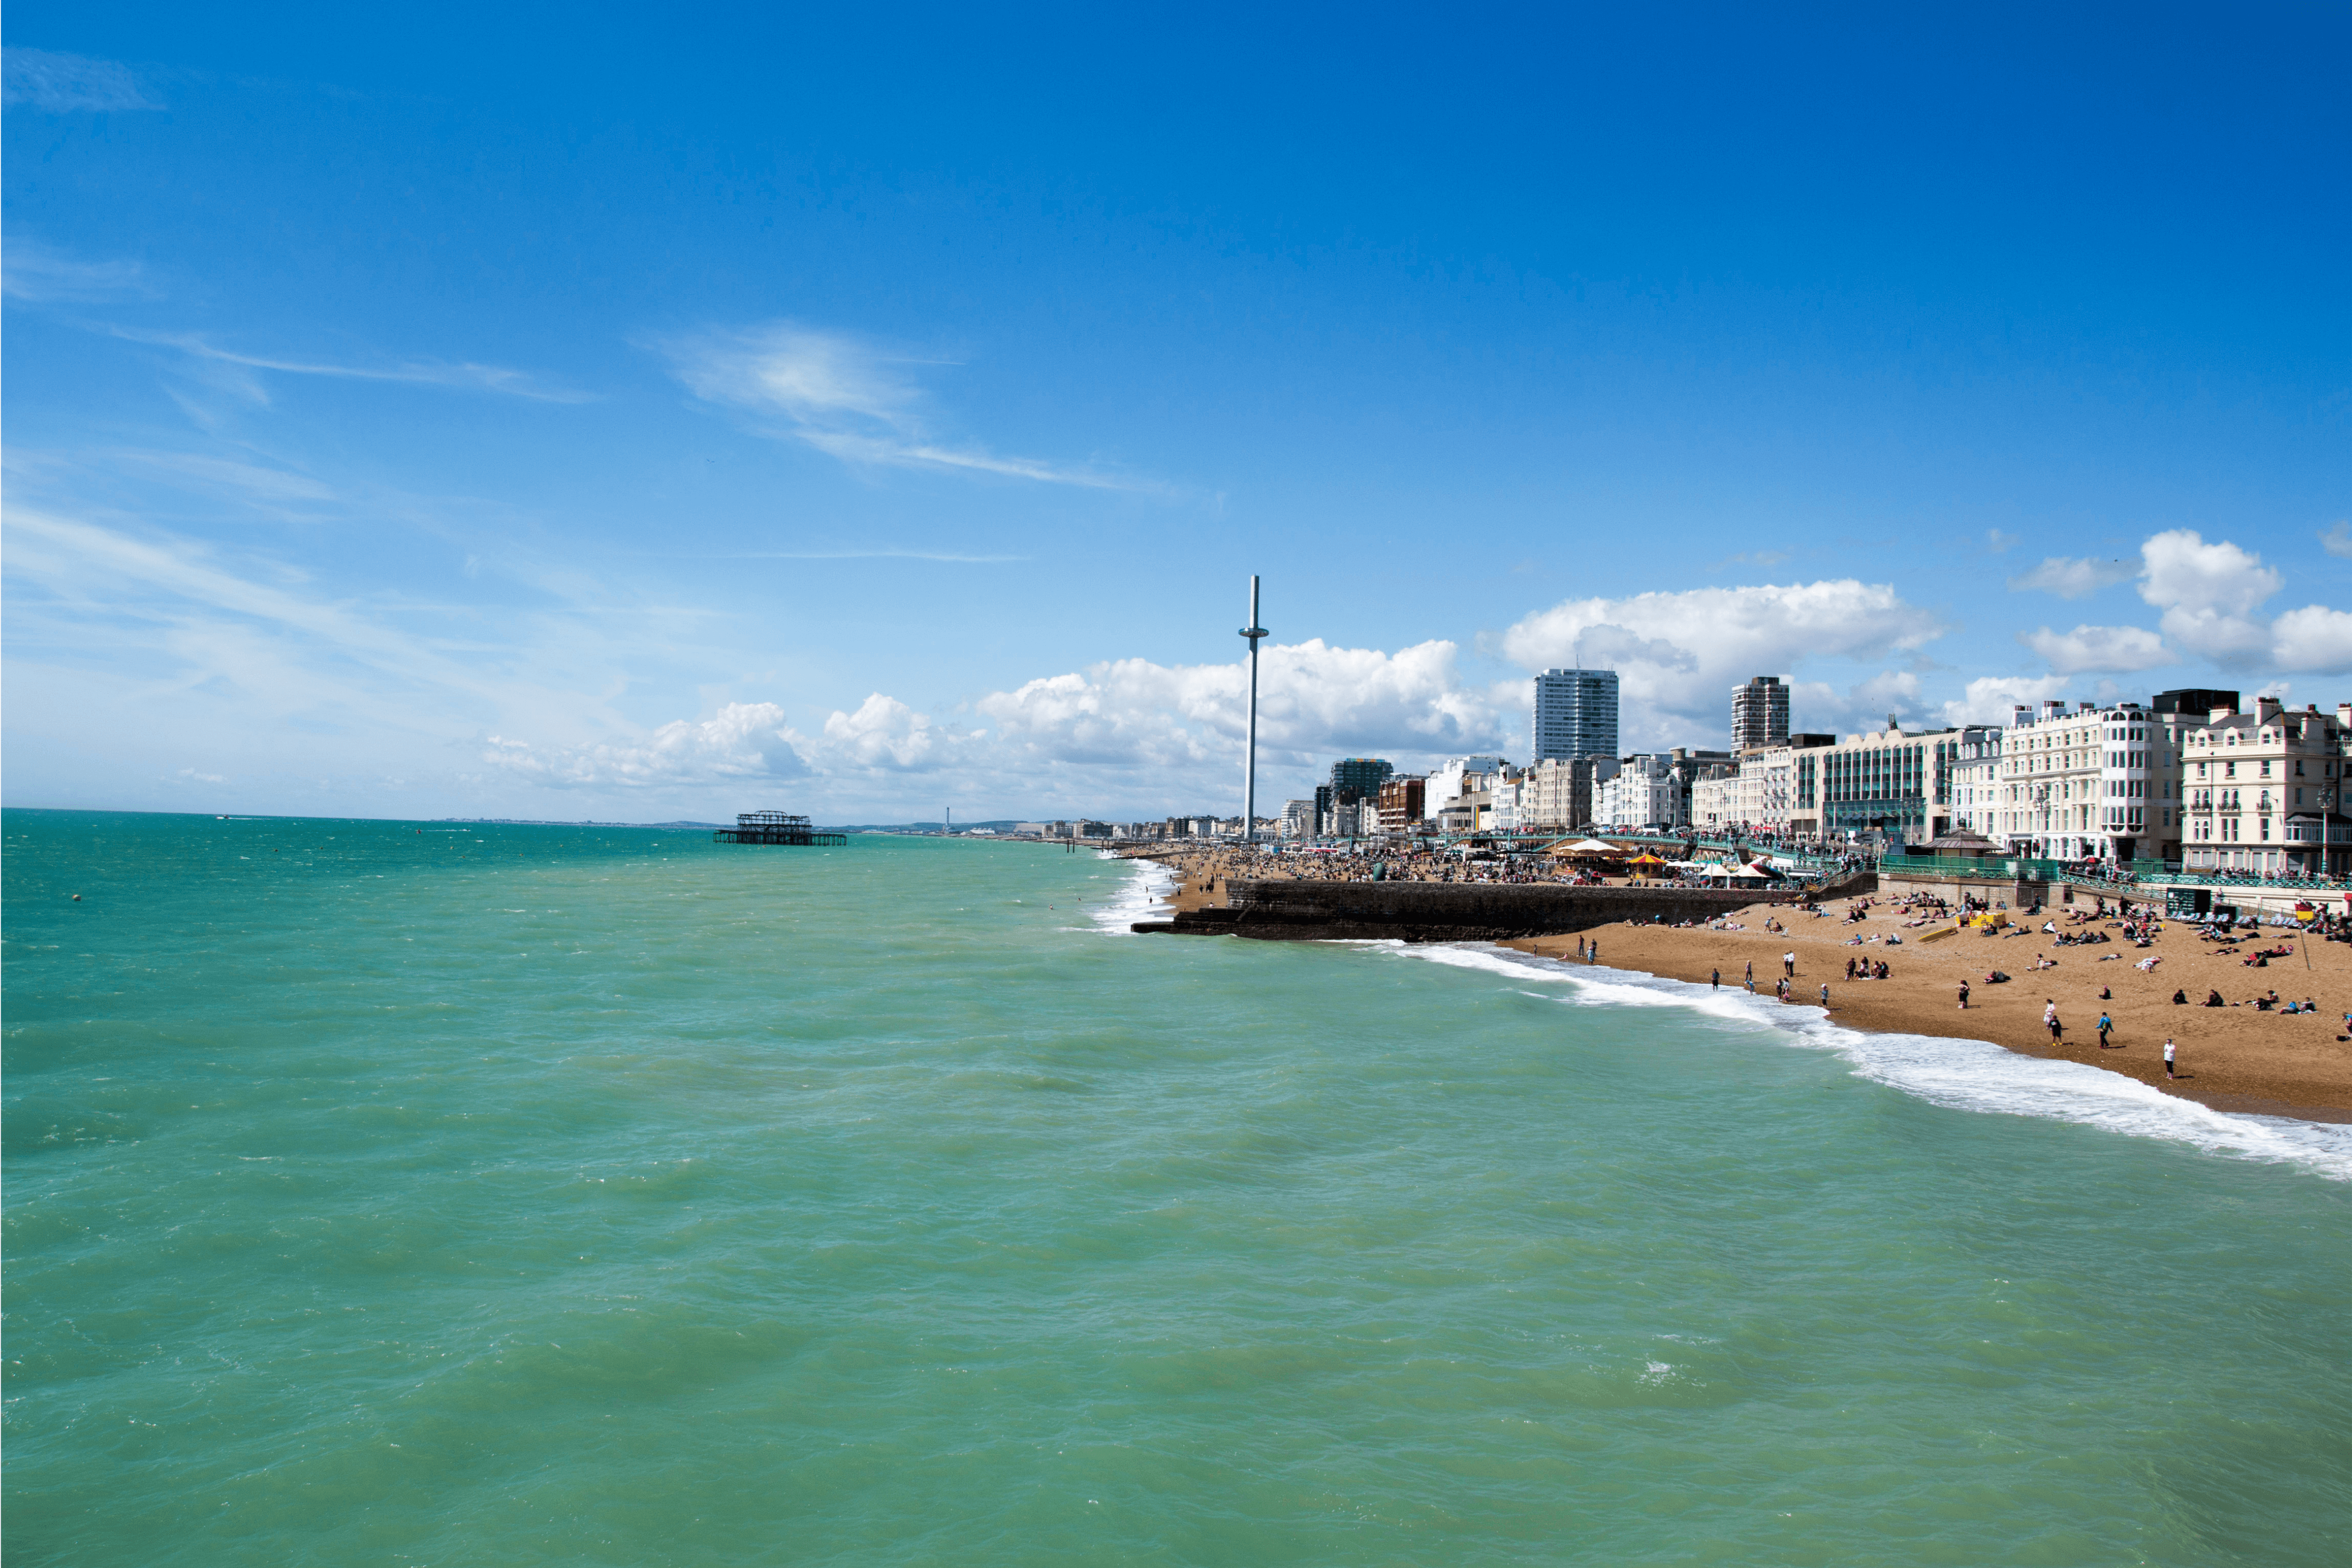 10 Best Things to Do in Brighton for a Great Day Out